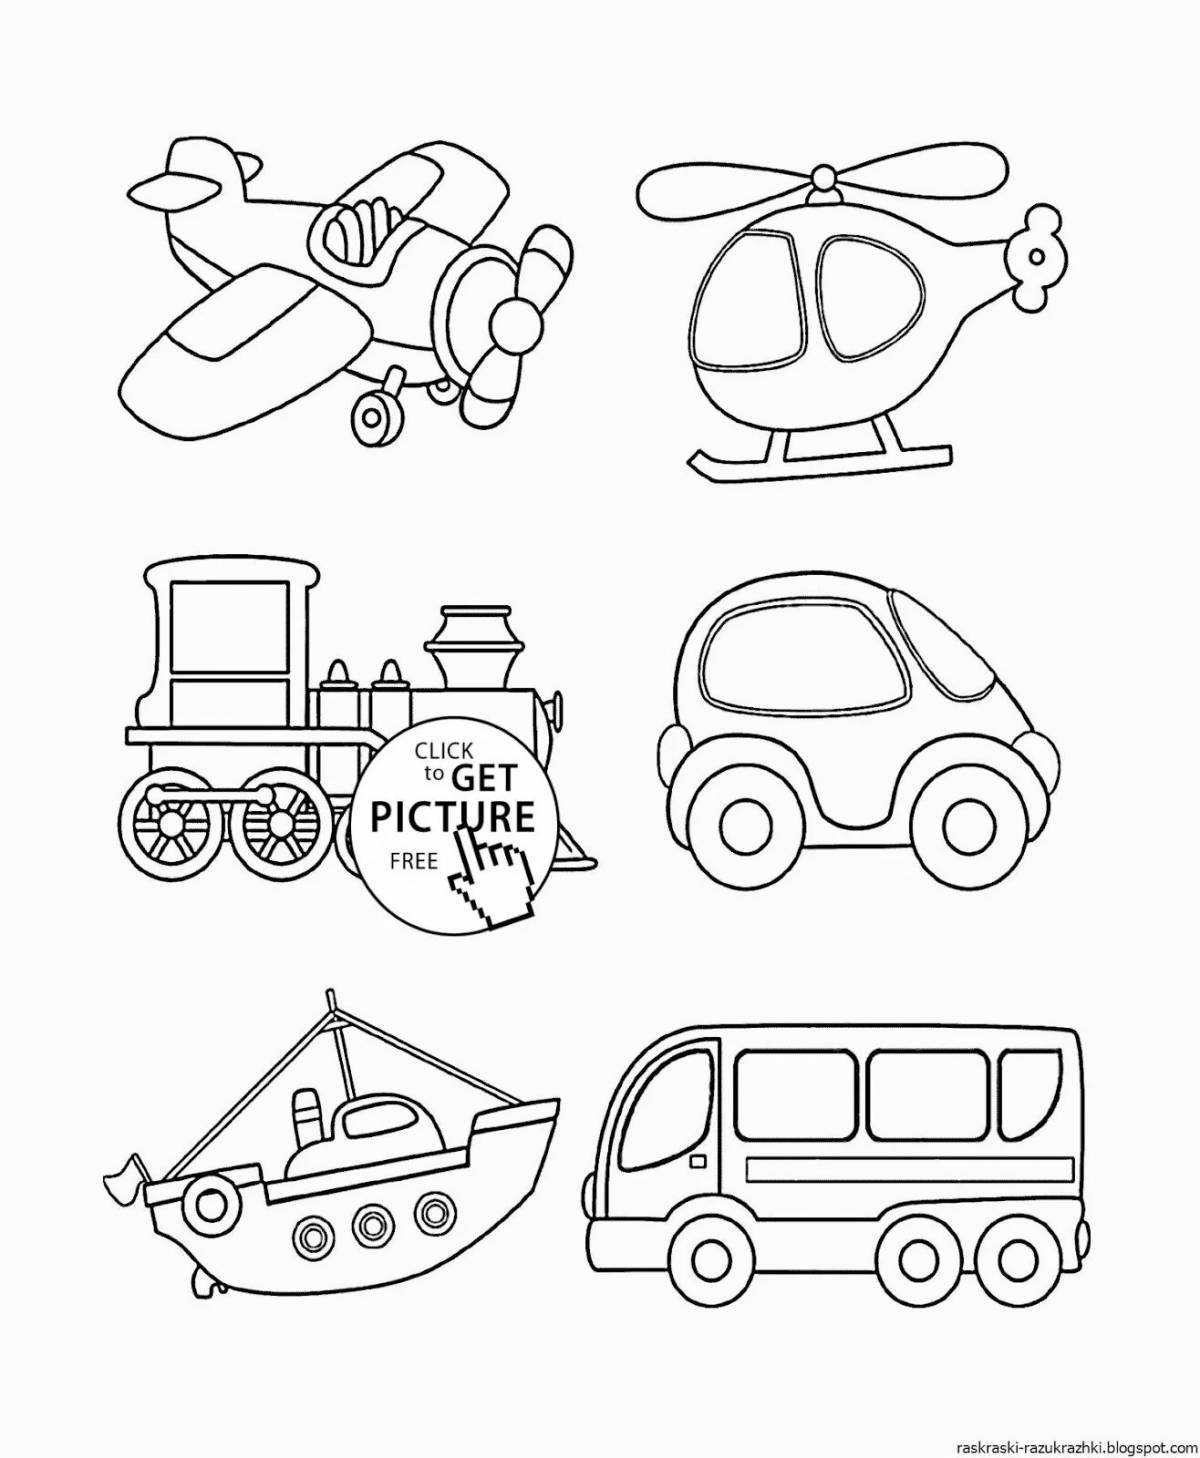 Glowing vehicle coloring page for kids